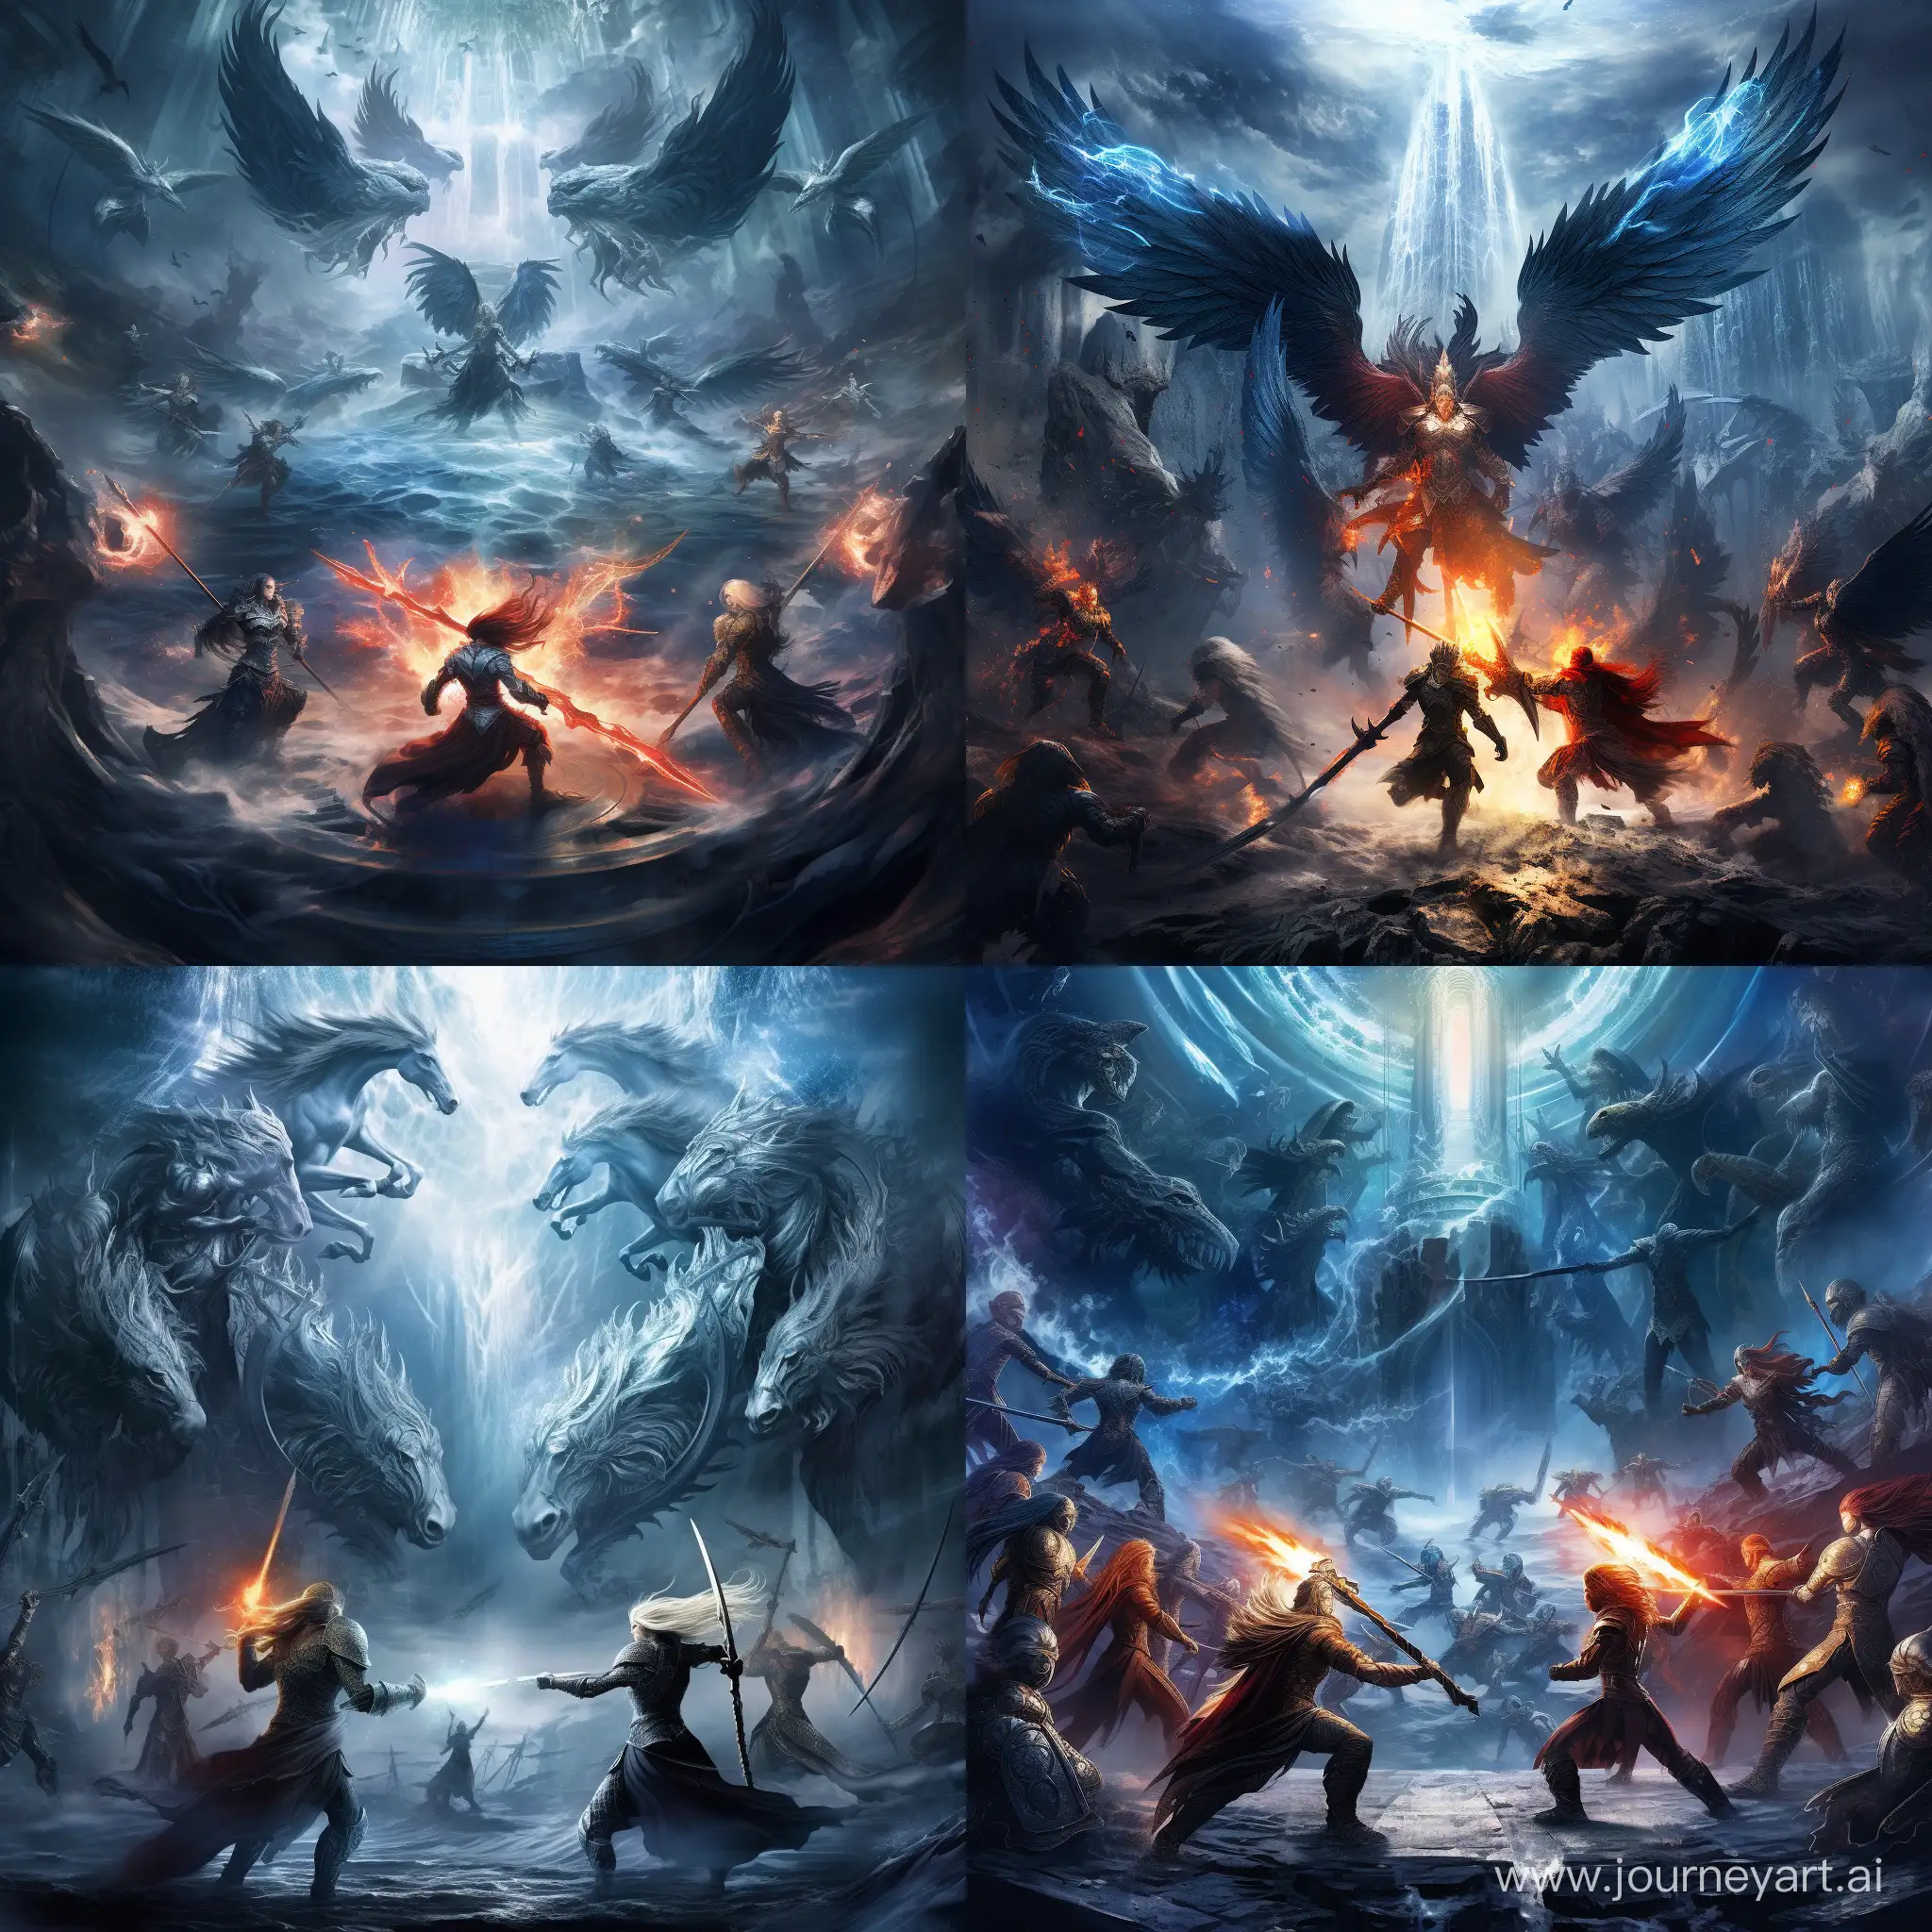 valkyries fighting alongside Thor wielding mjolner with lightning, battling ice giants, valhalla